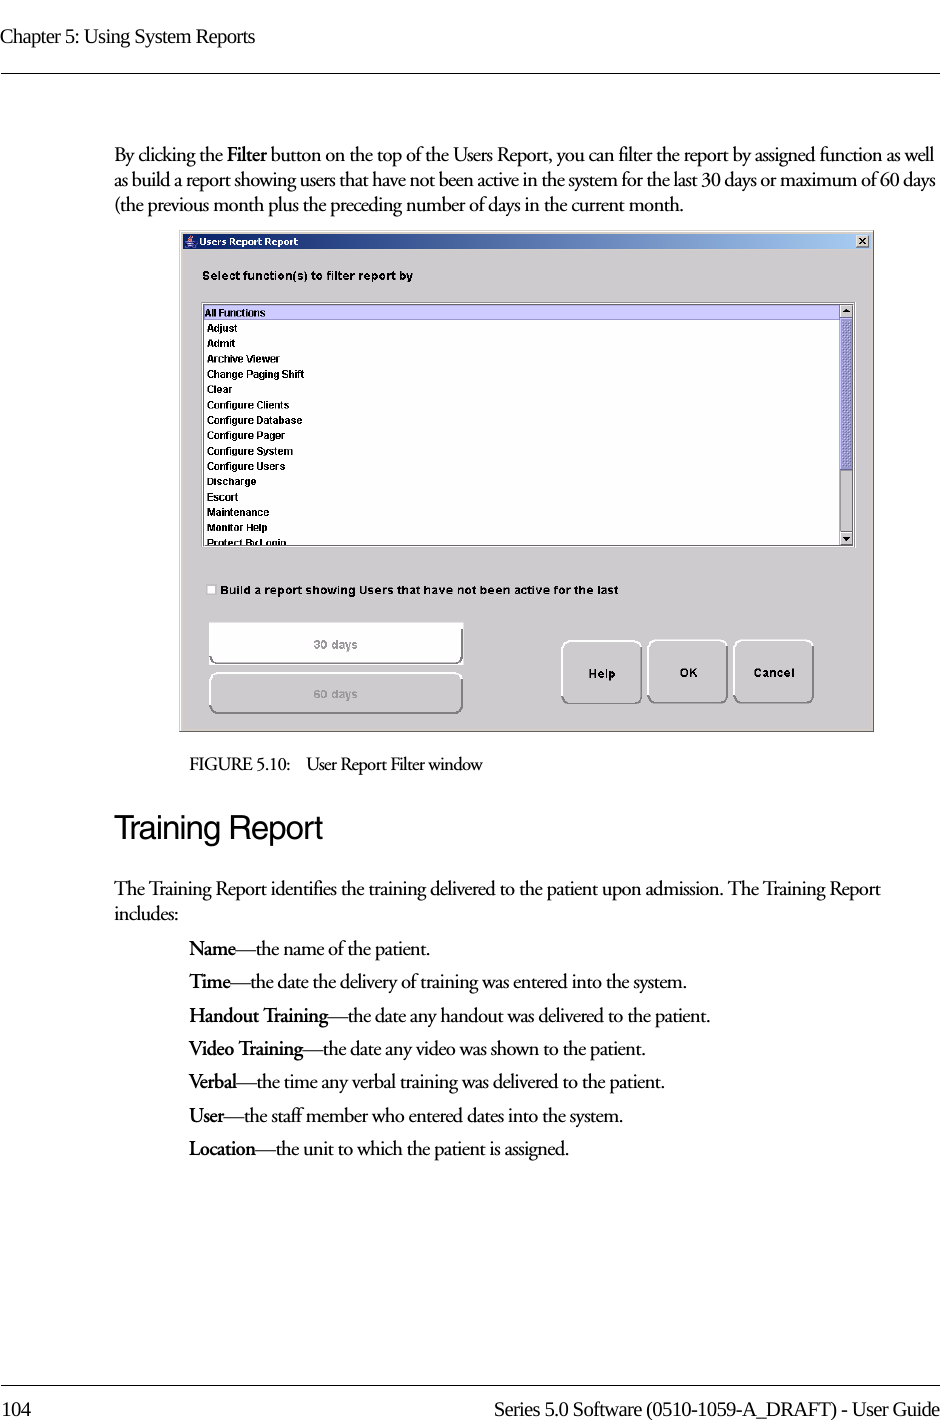 Chapter 5: Using System Reports104 Series 5.0 Software (0510-1059-A_DRAFT) - User GuideBy clicking the Filter button on the top of the Users Report, you can filter the report by assigned function as well as build a report showing users that have not been active in the system for the last 30 days or maximum of 60 days (the previous month plus the preceding number of days in the current month. FIGURE 5.10:    User Report Filter windowTraining ReportThe Training Report identifies the training delivered to the patient upon admission. The Training Report includes:Name—the name of the patient. Time—the date the delivery of training was entered into the system.Handout Training—the date any handout was delivered to the patient.Video Training—the date any video was shown to the patient.Verbal—the time any verbal training was delivered to the patient.User—the staff member who entered dates into the system.Location—the unit to which the patient is assigned.